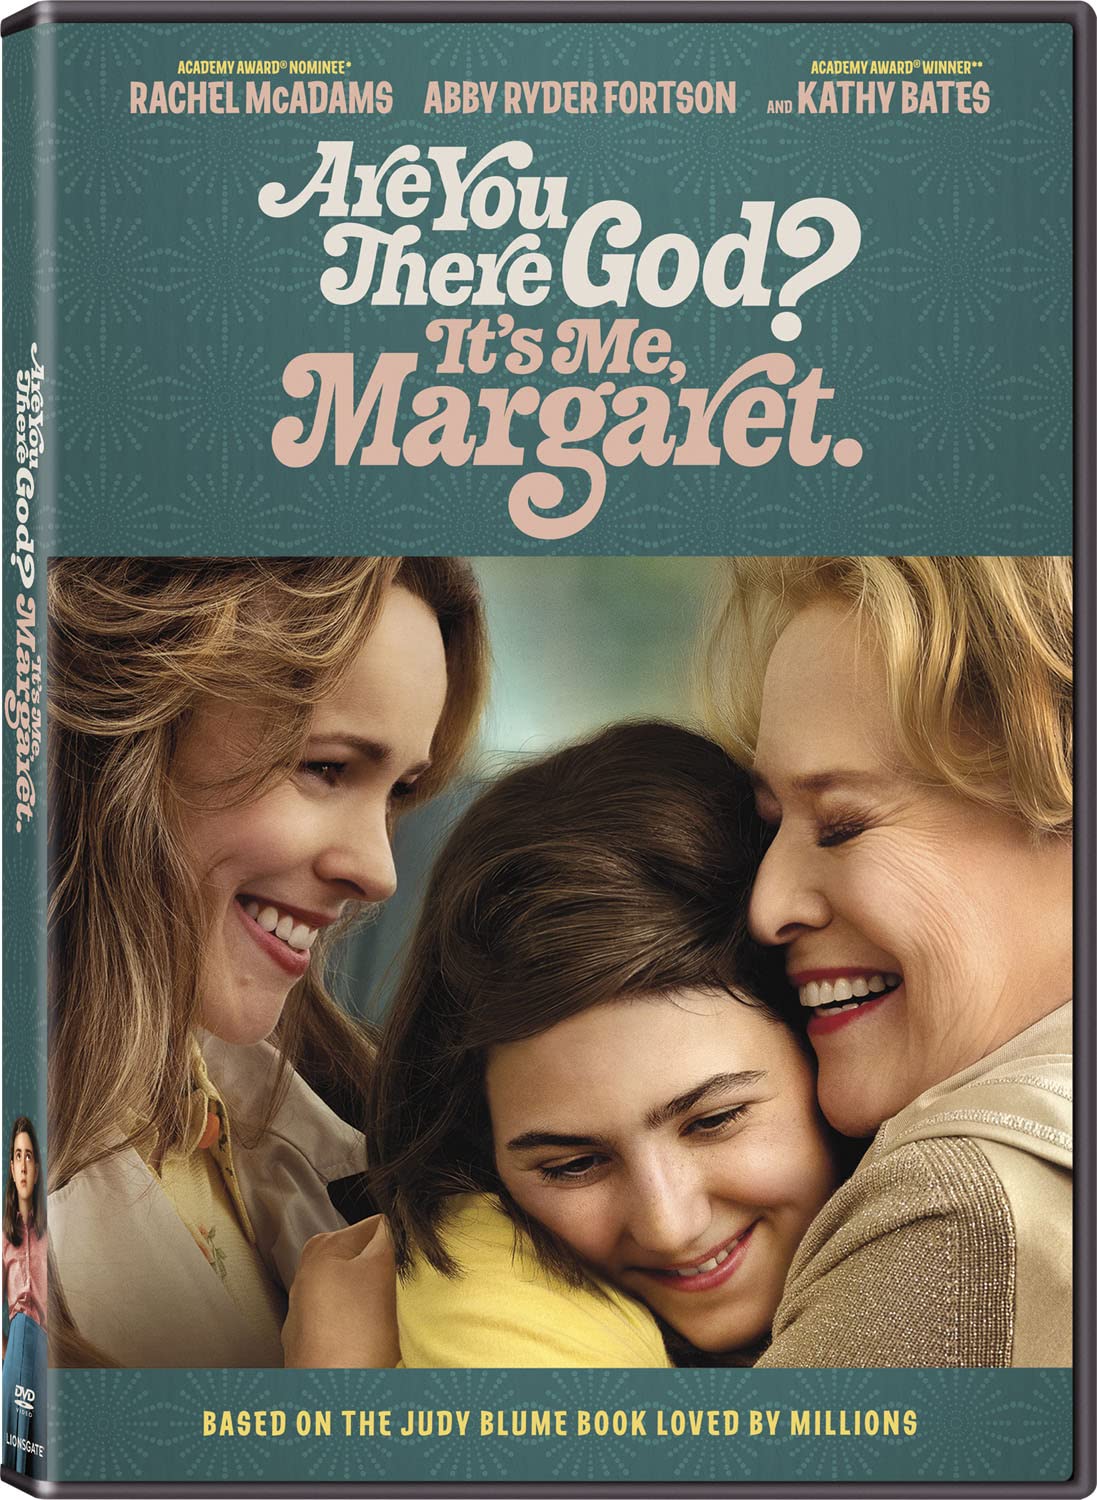 Image for "Are you there God? It’s me, Margaret."